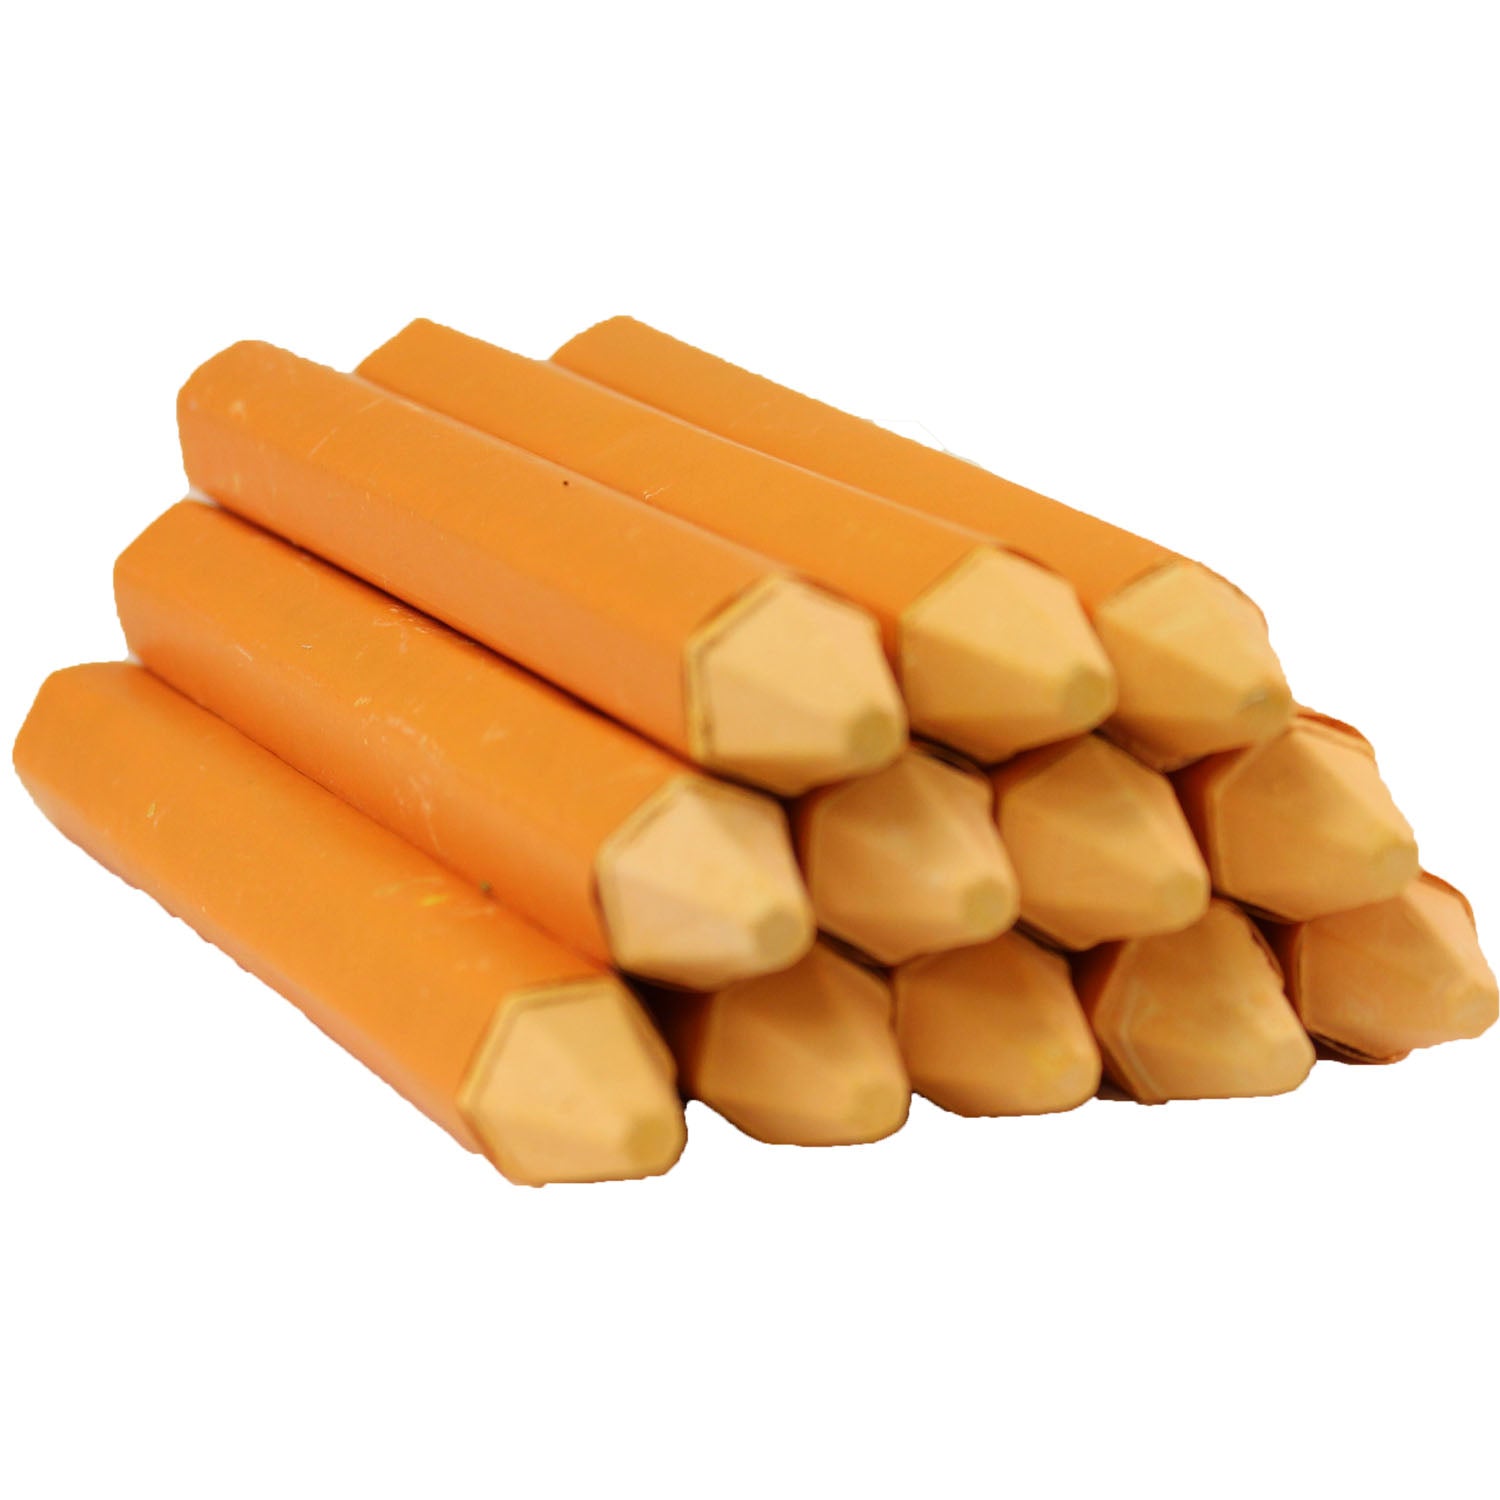 Markal B Orange Color Solid Paint Stick Marker Box of 12 Lead Free Crayon  NOS